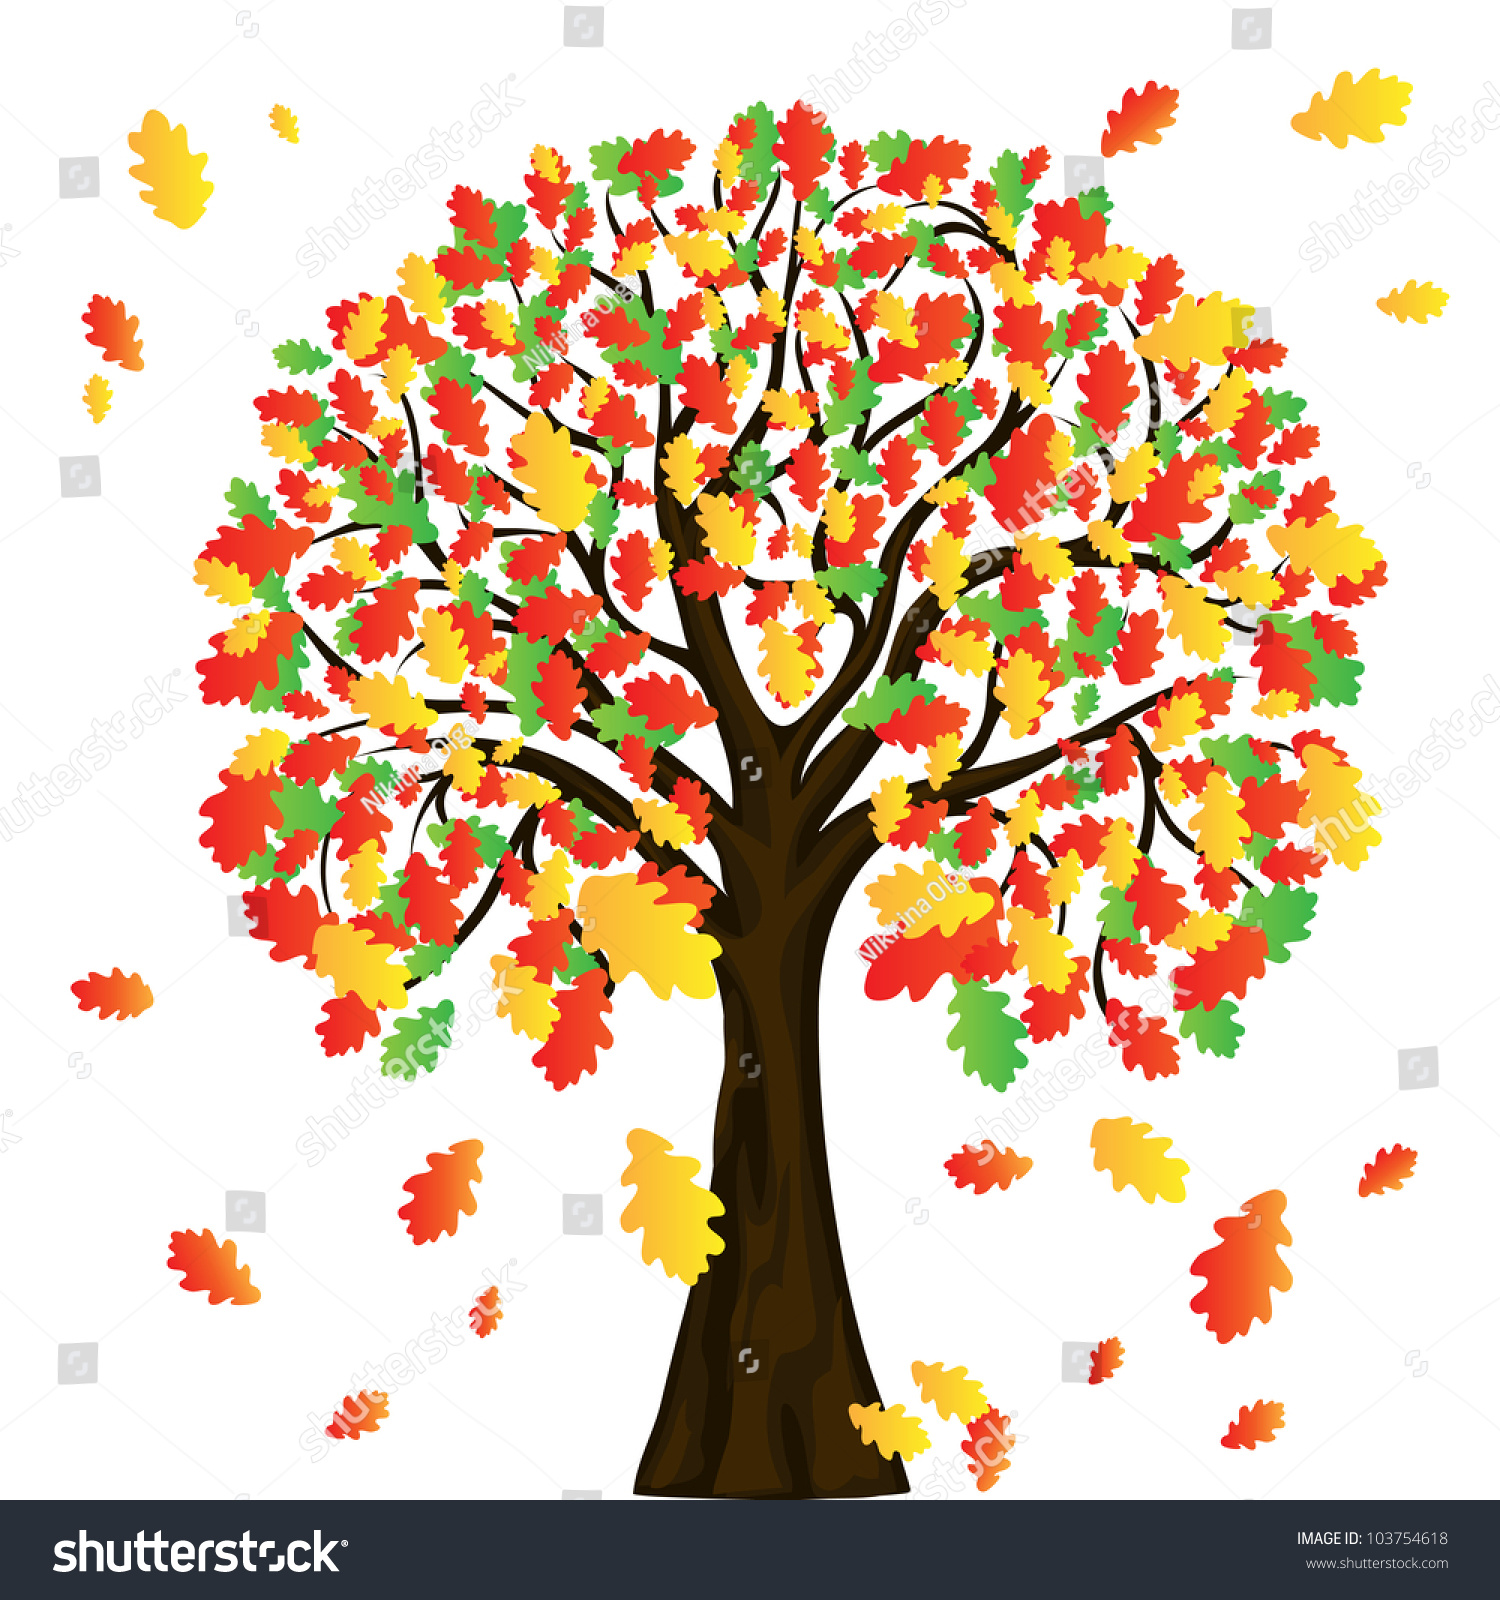 Autumn Tree For Your Design, Vector Image - 103754618 : Shutterstock